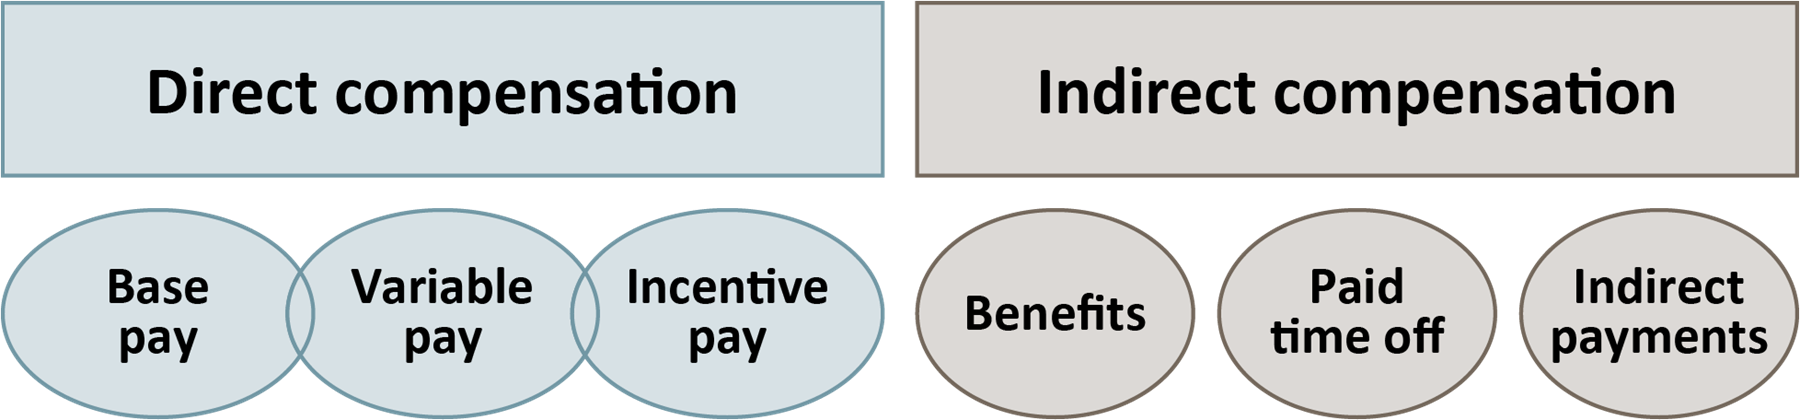 Identifying incentive pay